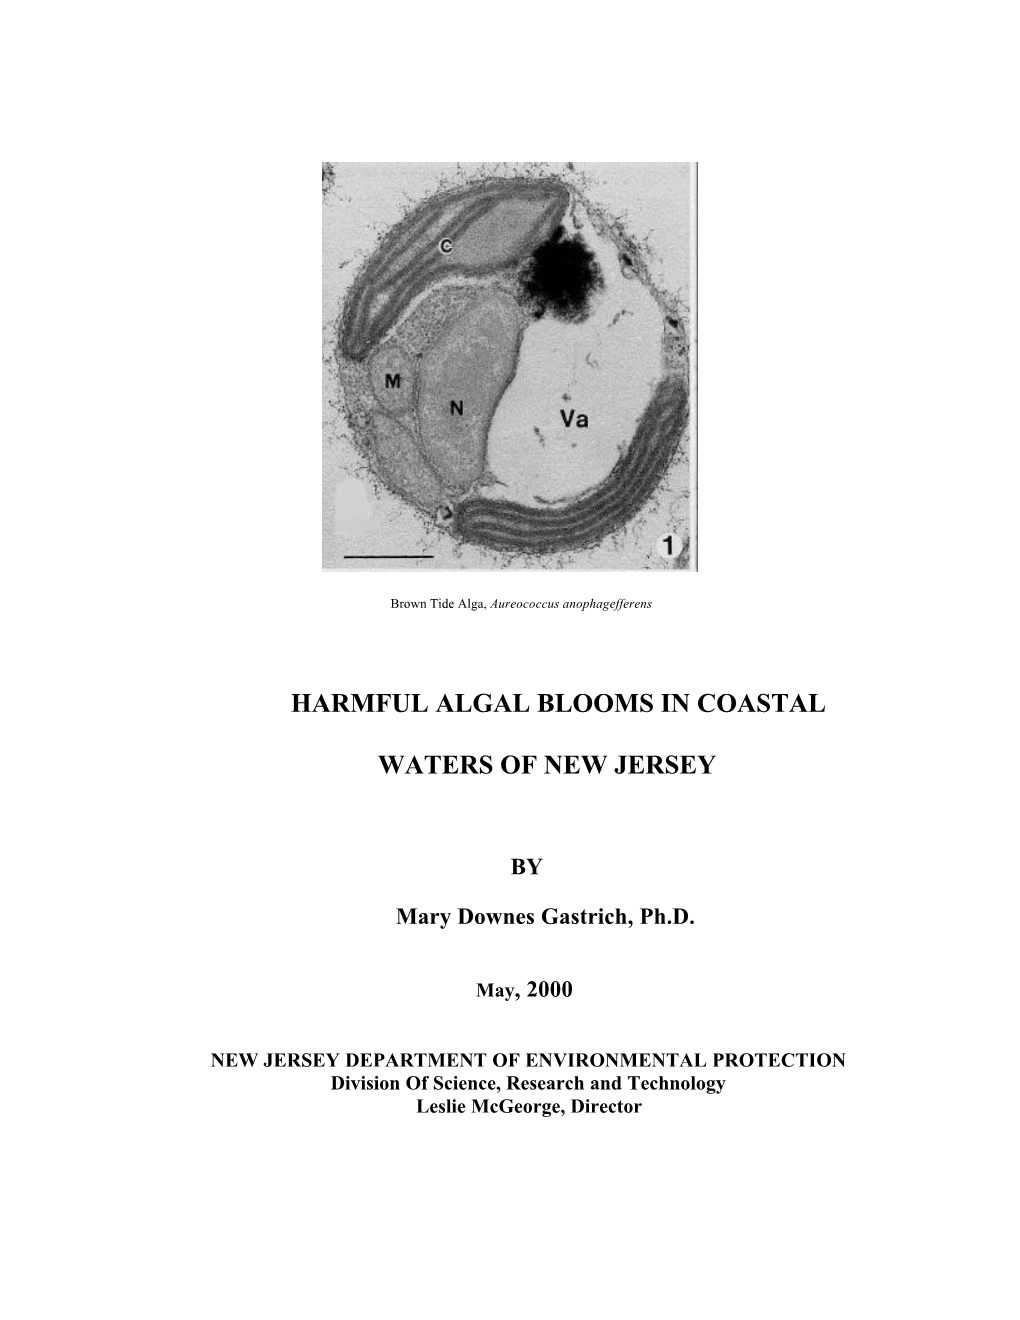 Harmful Algal Blooms in Coastal Waters of New Jersey Include Red Tides, Green Tides, Brown Tides and Other Harmful Species As Listed in Appendix I